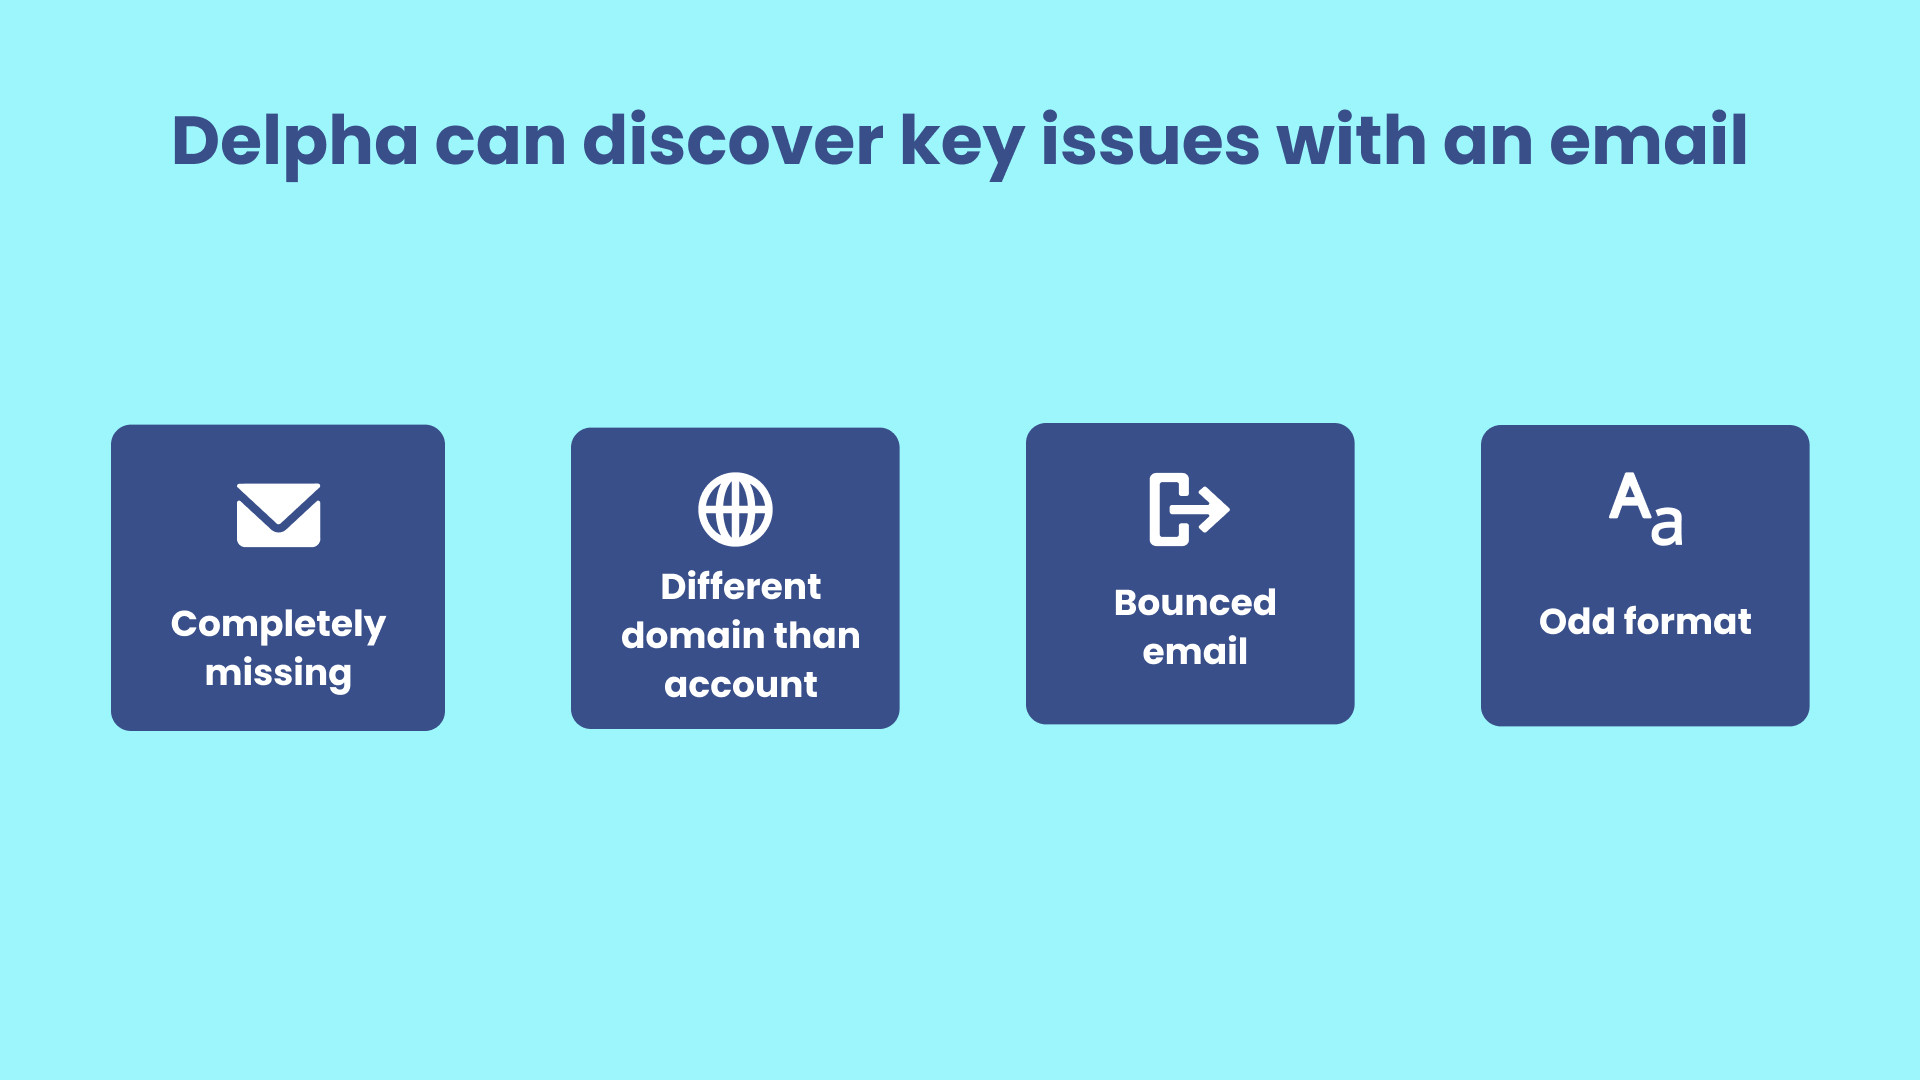 With Identify Missing Email Addresses, Delpha can detect bad emails arising from the following situations if an email is simply missing, if the domain of the email and account are different, if the email has bounced and/or if the email format is incorrect